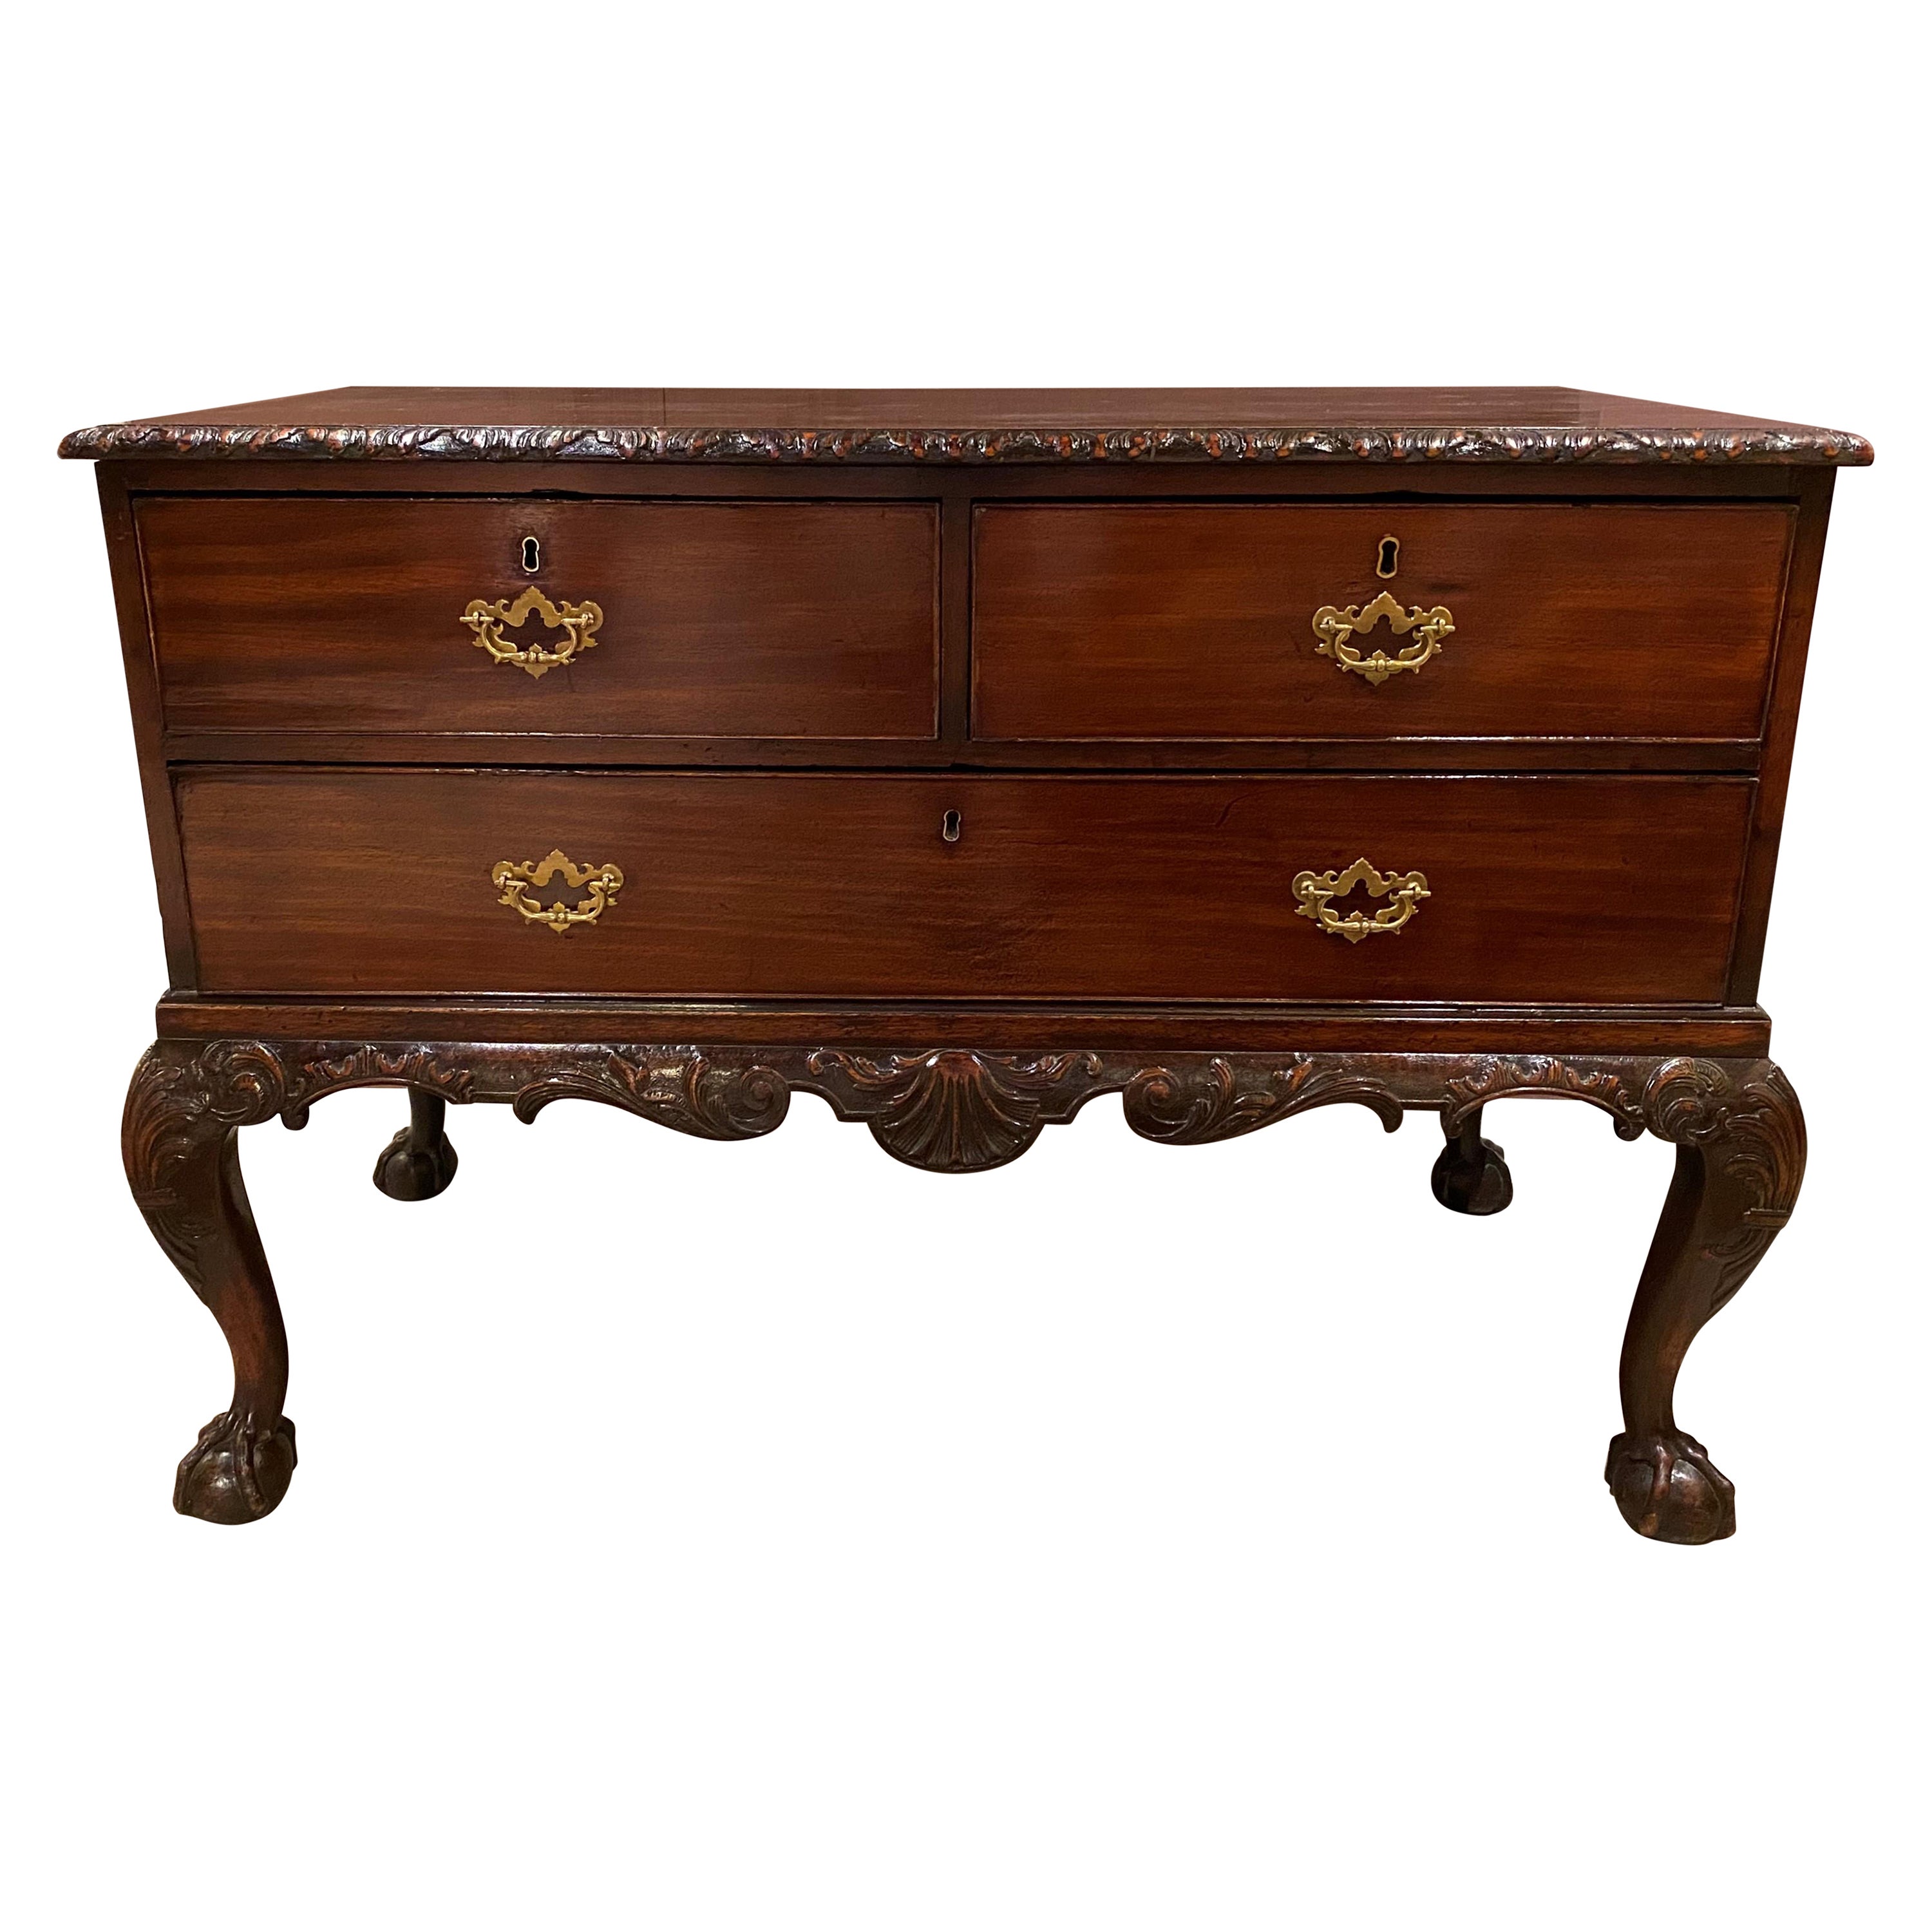 Magnificently Carved 18th Century English Mahogany Commode